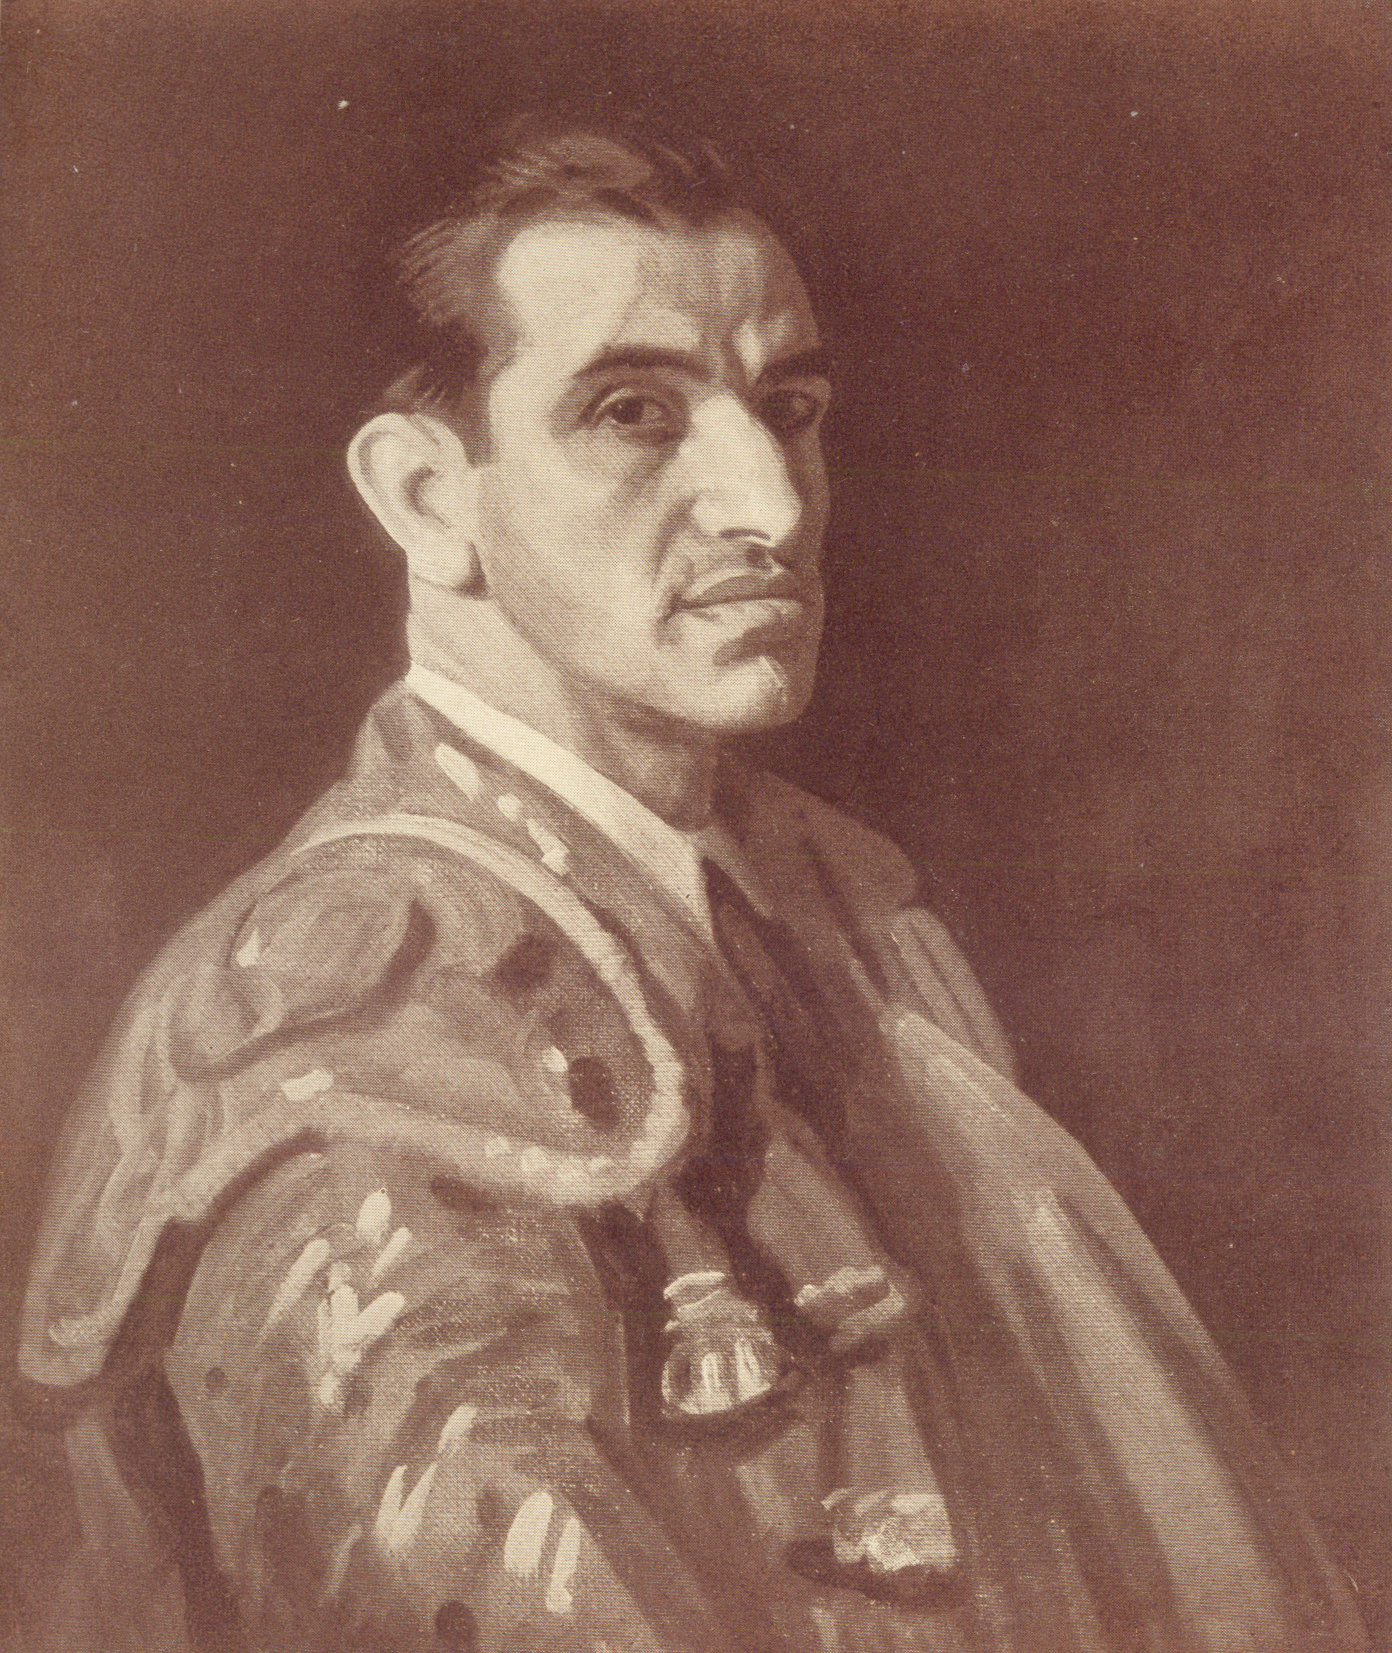 three quarter profile portrait of the fighter in his fighting costume. he has a powerful gaze.